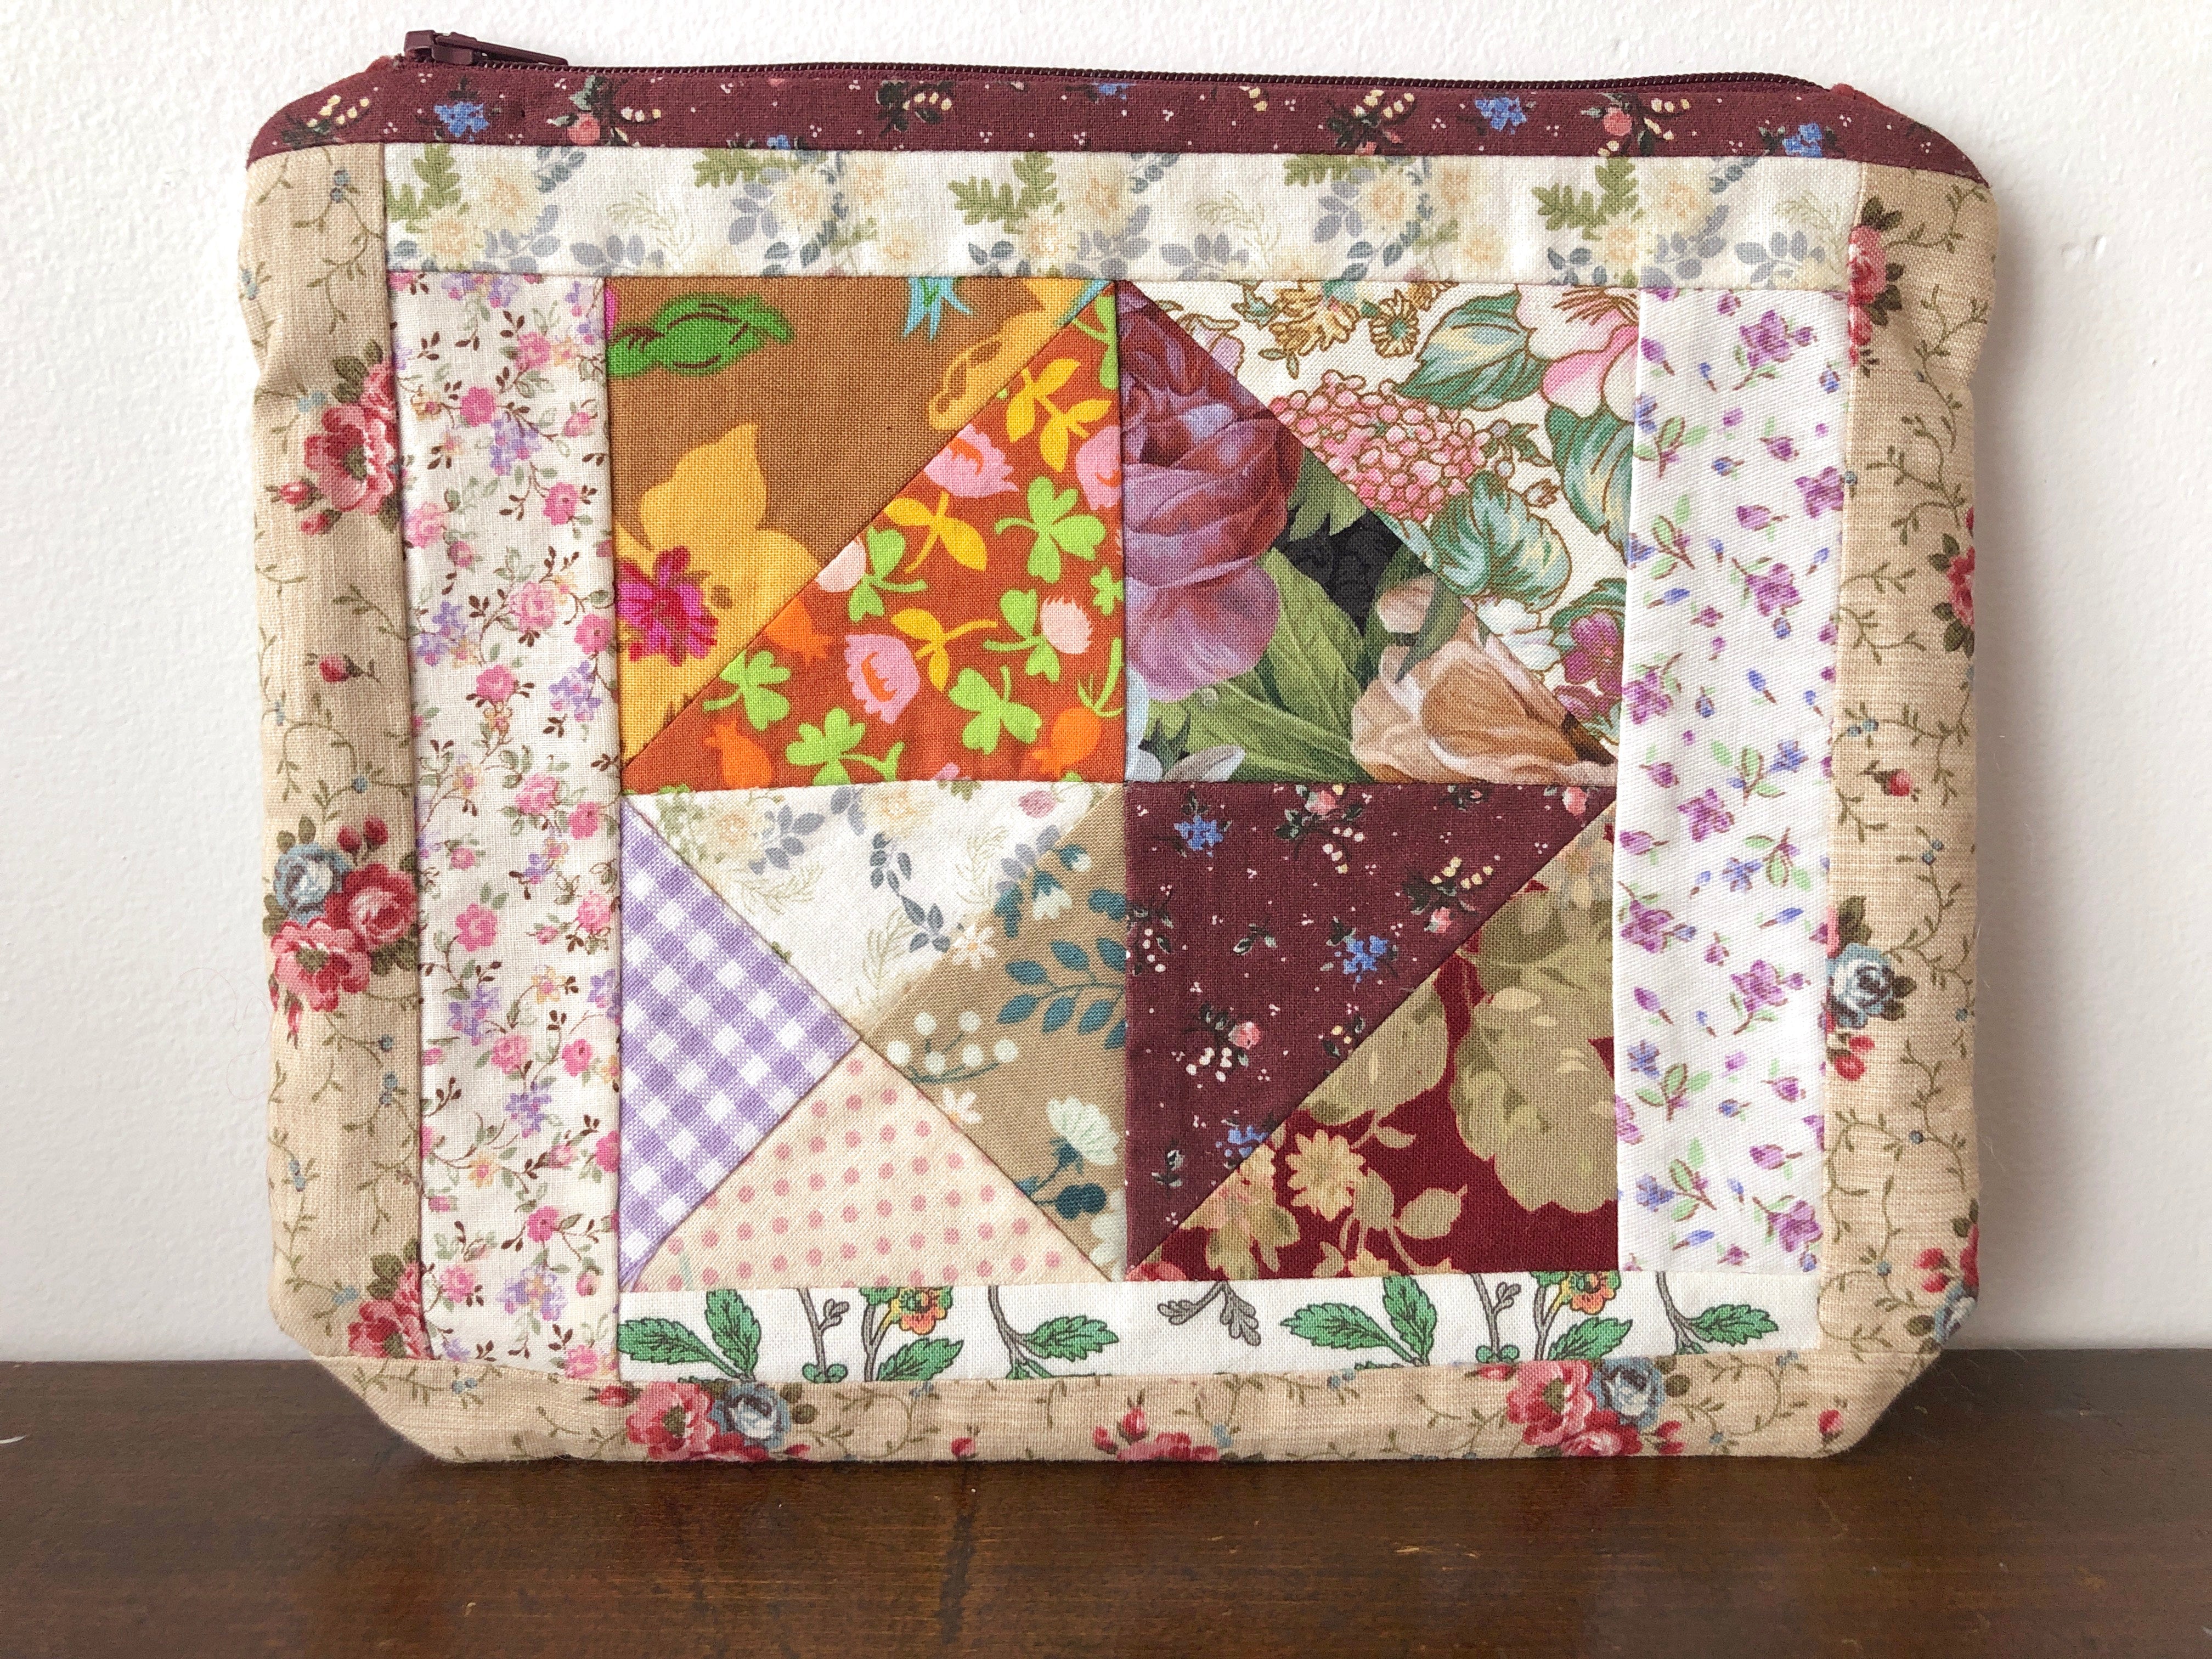 Patchwork Pouch #2